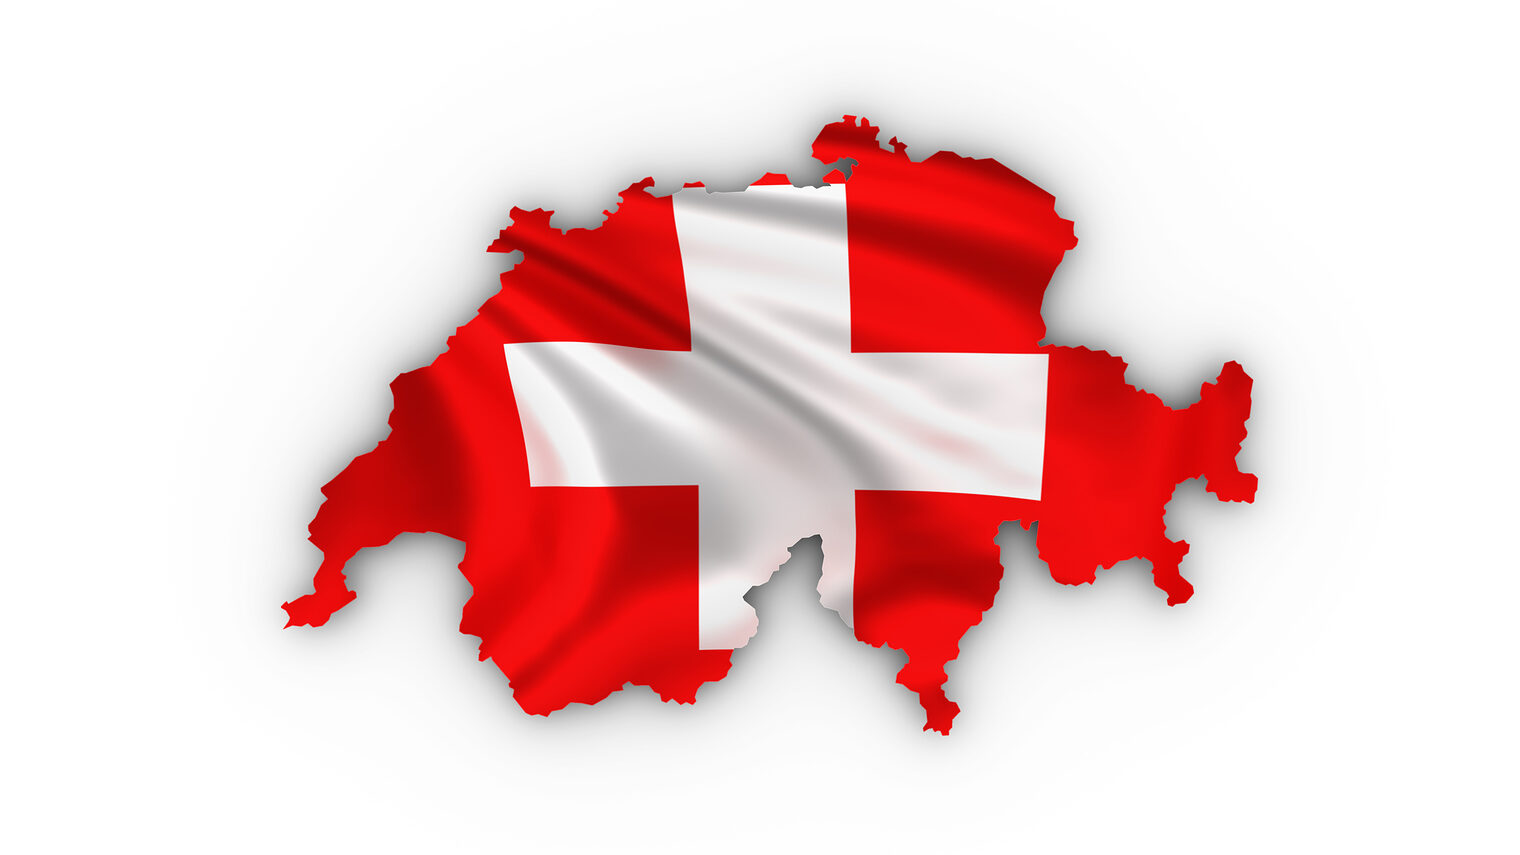 switzerland, swiss, map, flag, travel, illustration, isolated, europe, democracy, zurich, neutrality, grey, texture, gray, concept, freedom, silhouette, symbol, white, background, vacation, shiny, shape, border, 3d, color, country, state, shadow, mountain, render, black, outline, peace, banner, folds, national, pride, wind, nation, geography, ripples, cartography, waving, patriotism, geneva, patriot, bern, canton